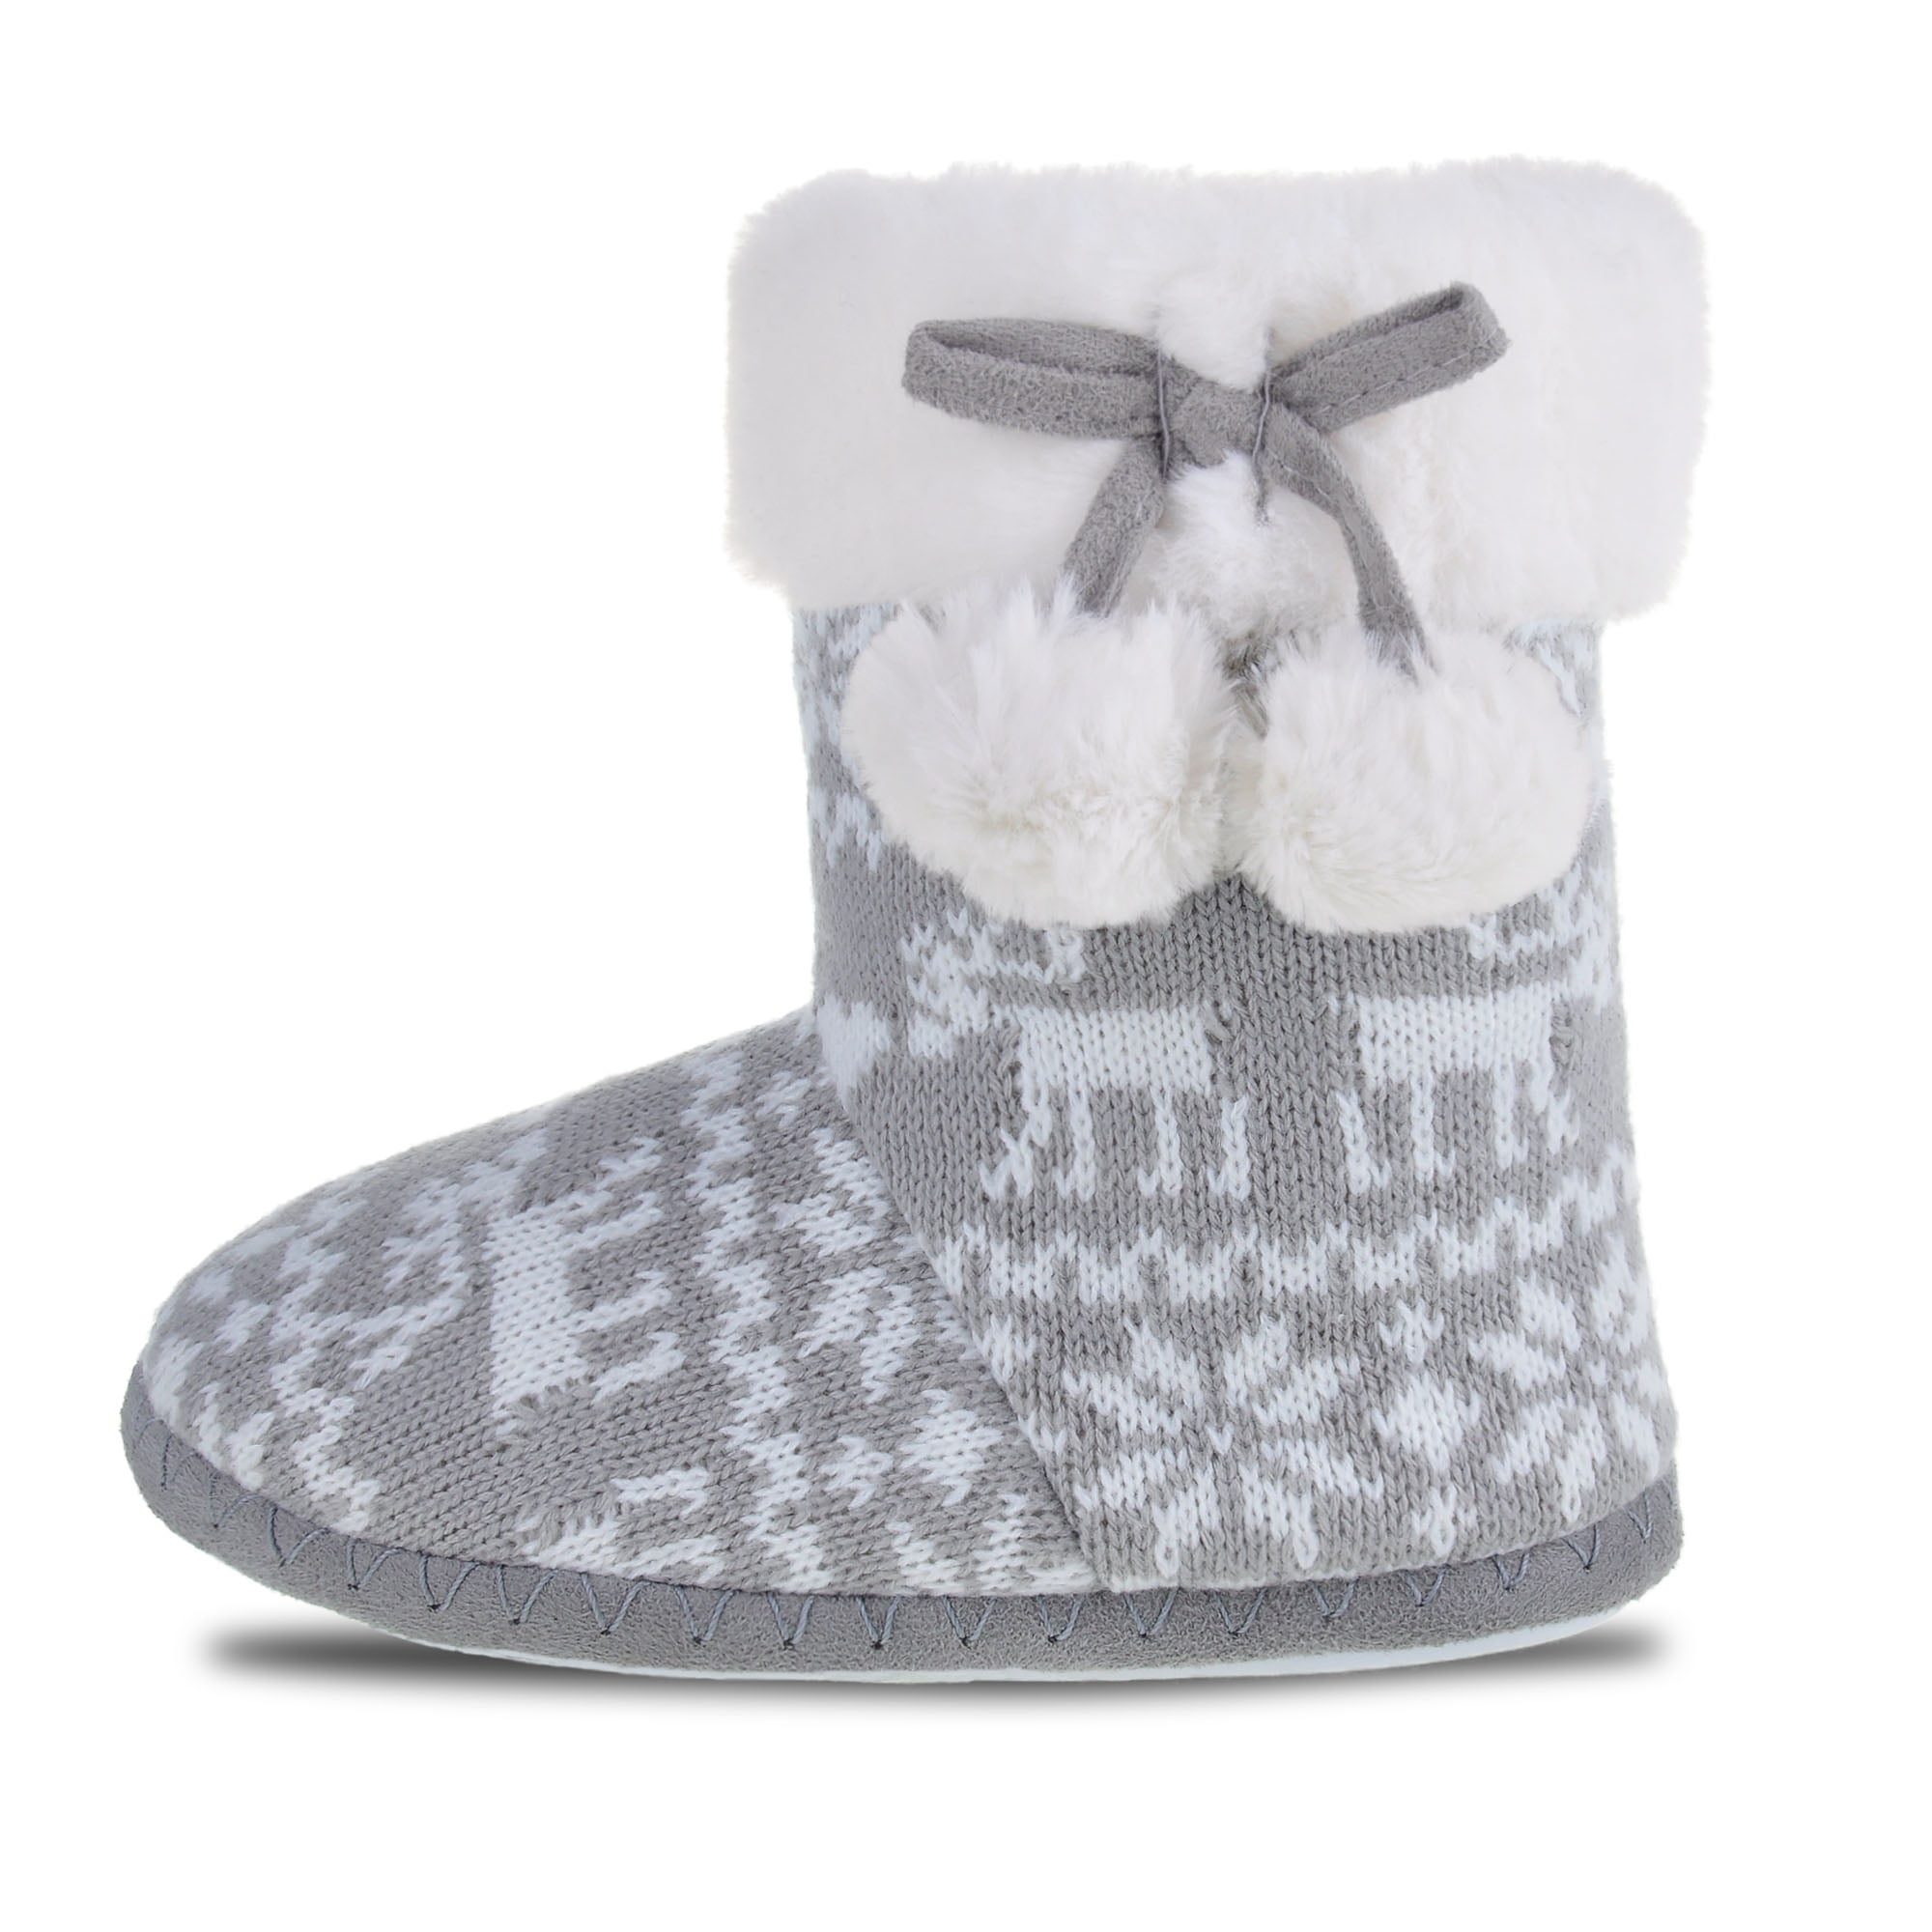 HOMEHOT Girls Bootie Slippers Fuzzy Plush Boots Shoes Memory Foam ...